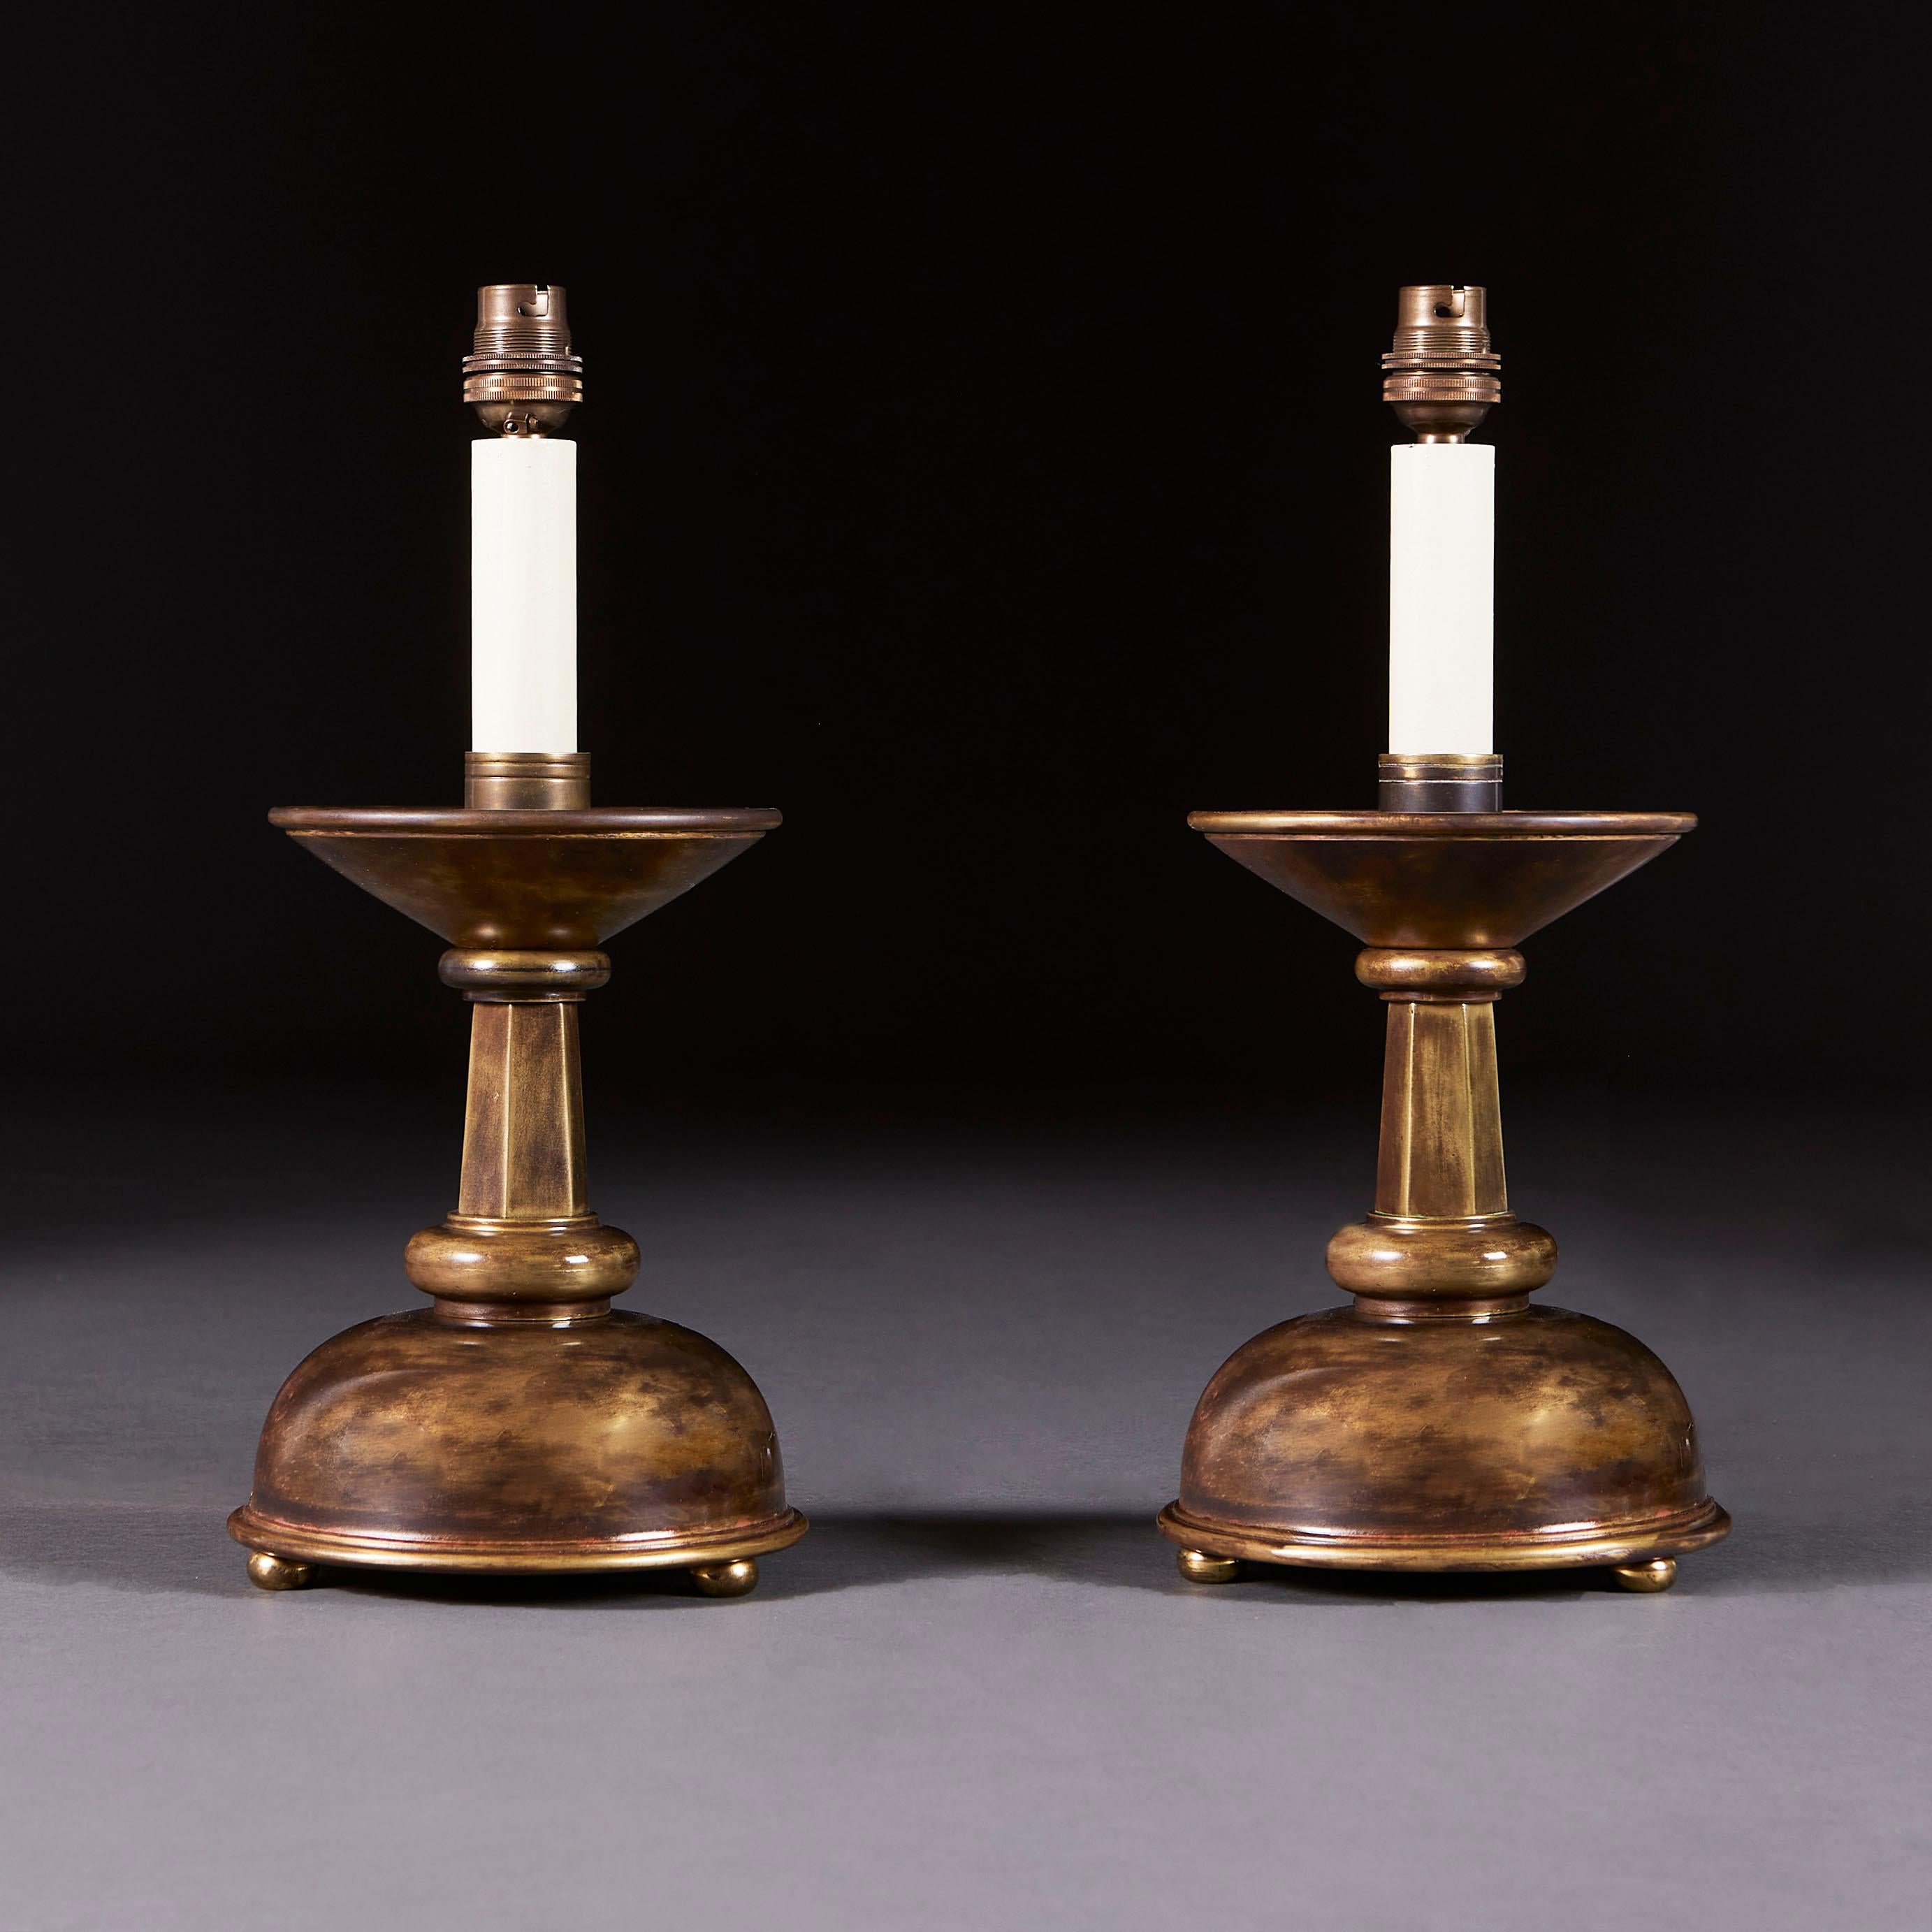 English A Pair of Brass Arts and Crafts Table Lamps